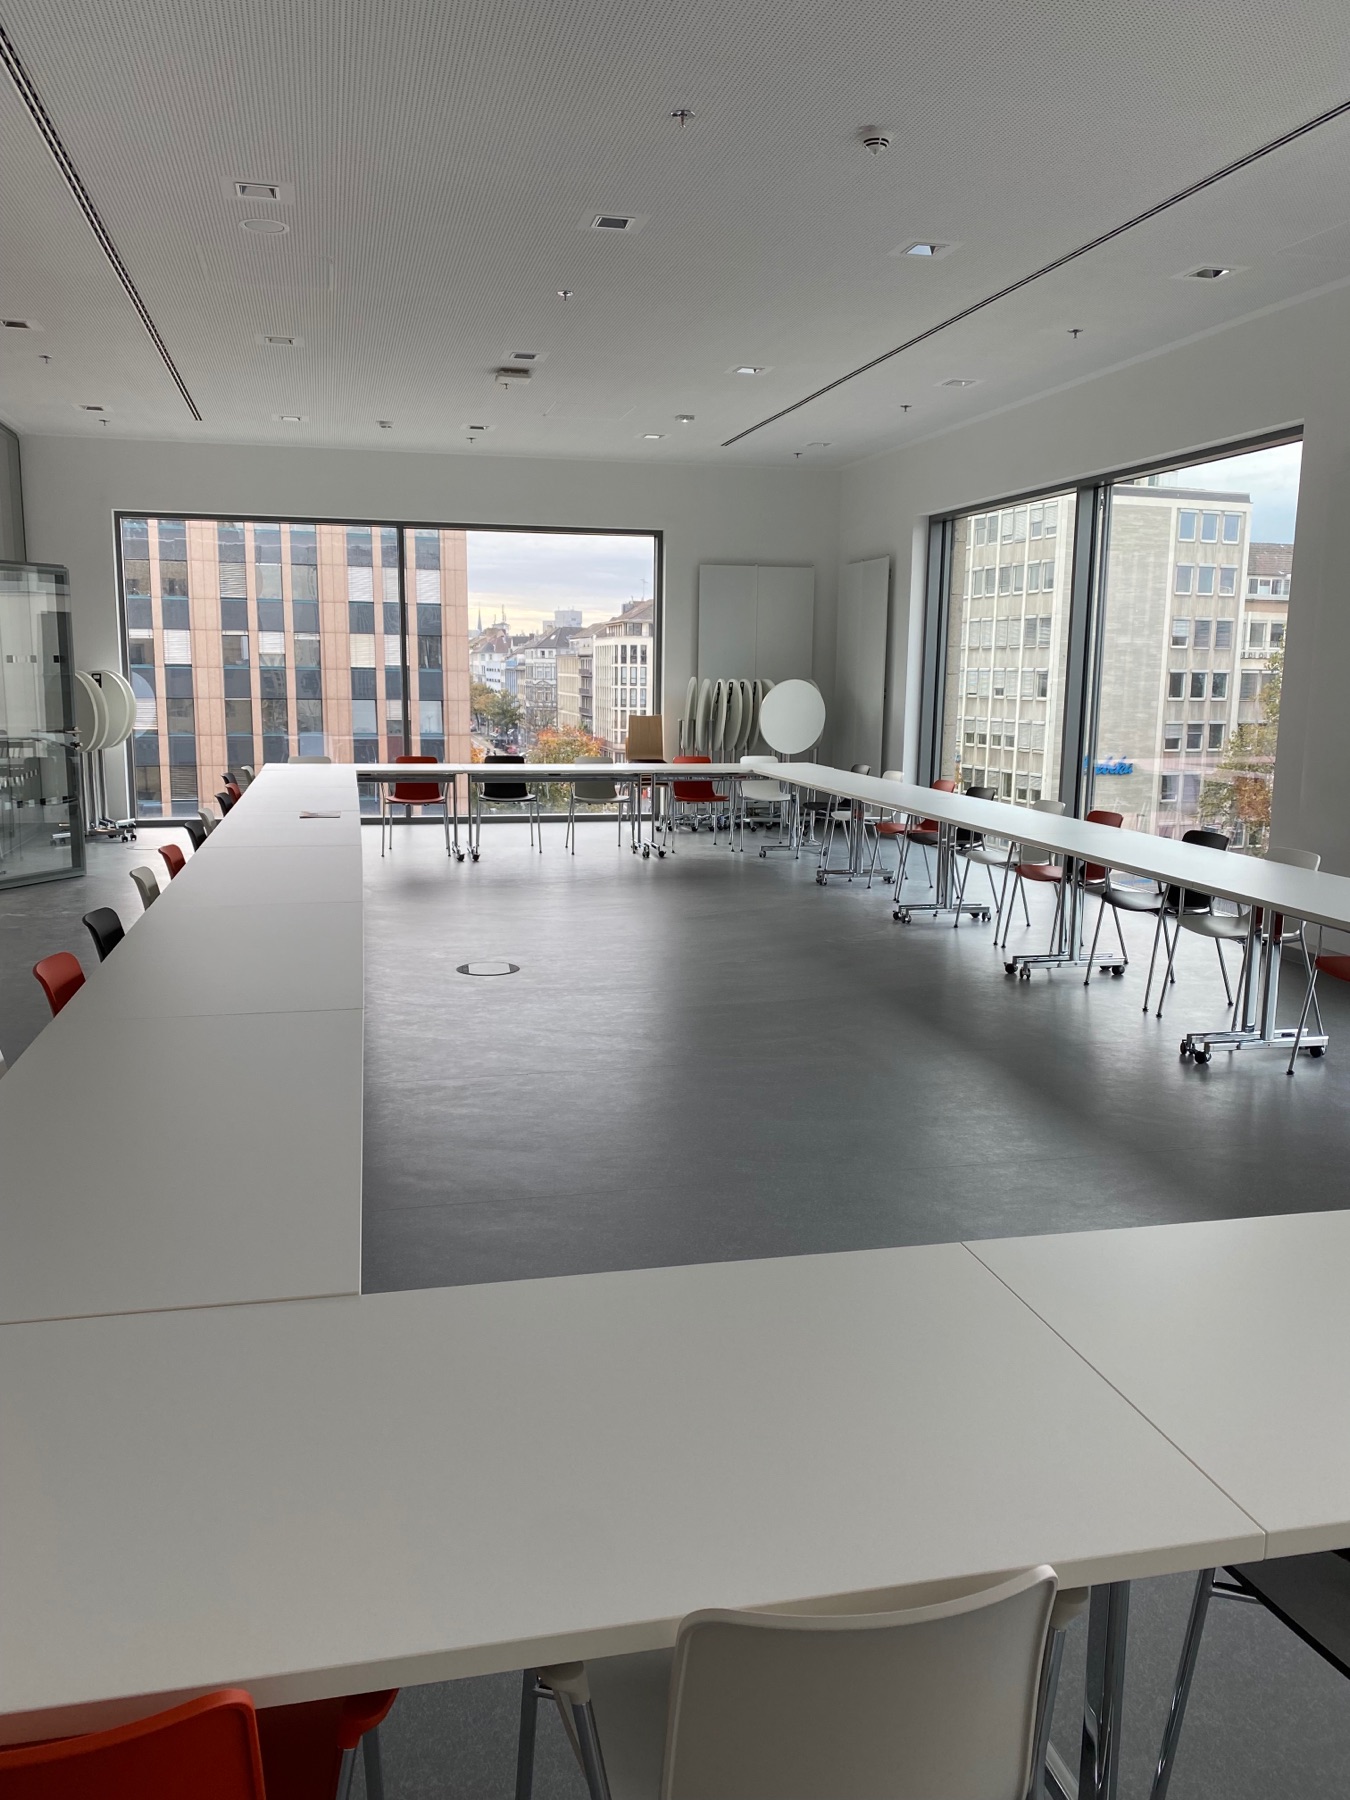 Meeting room where the Accessibility Club meetup will take place; chairs around a table arrangement